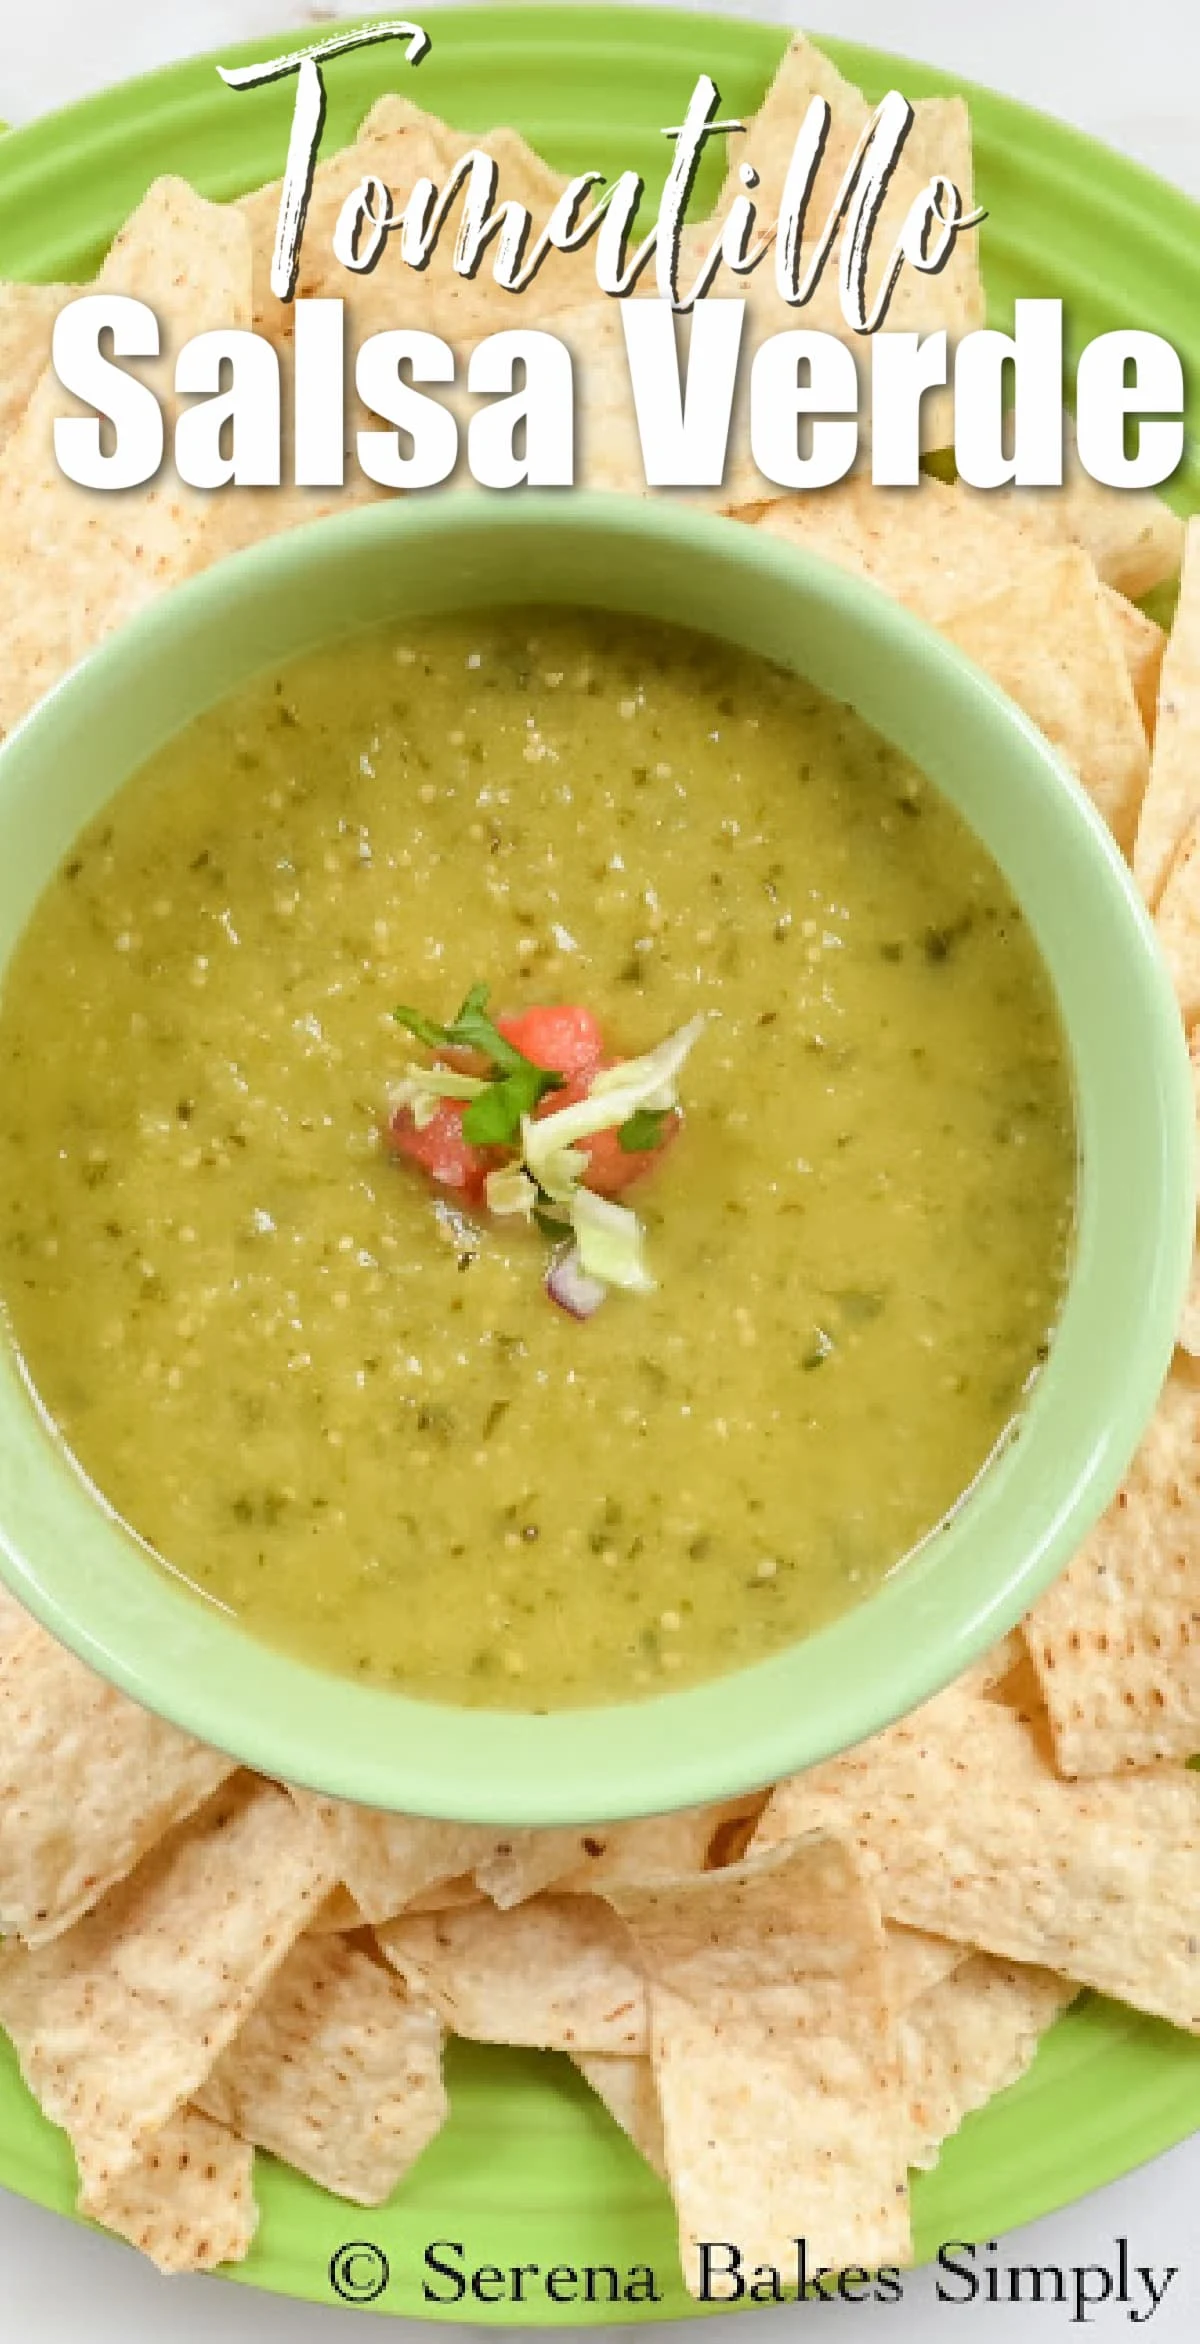 Tomatillo Salsa Verde in a green bowl with chips around the edge. White text at the top of photo Tomatillo Salsa Verde.